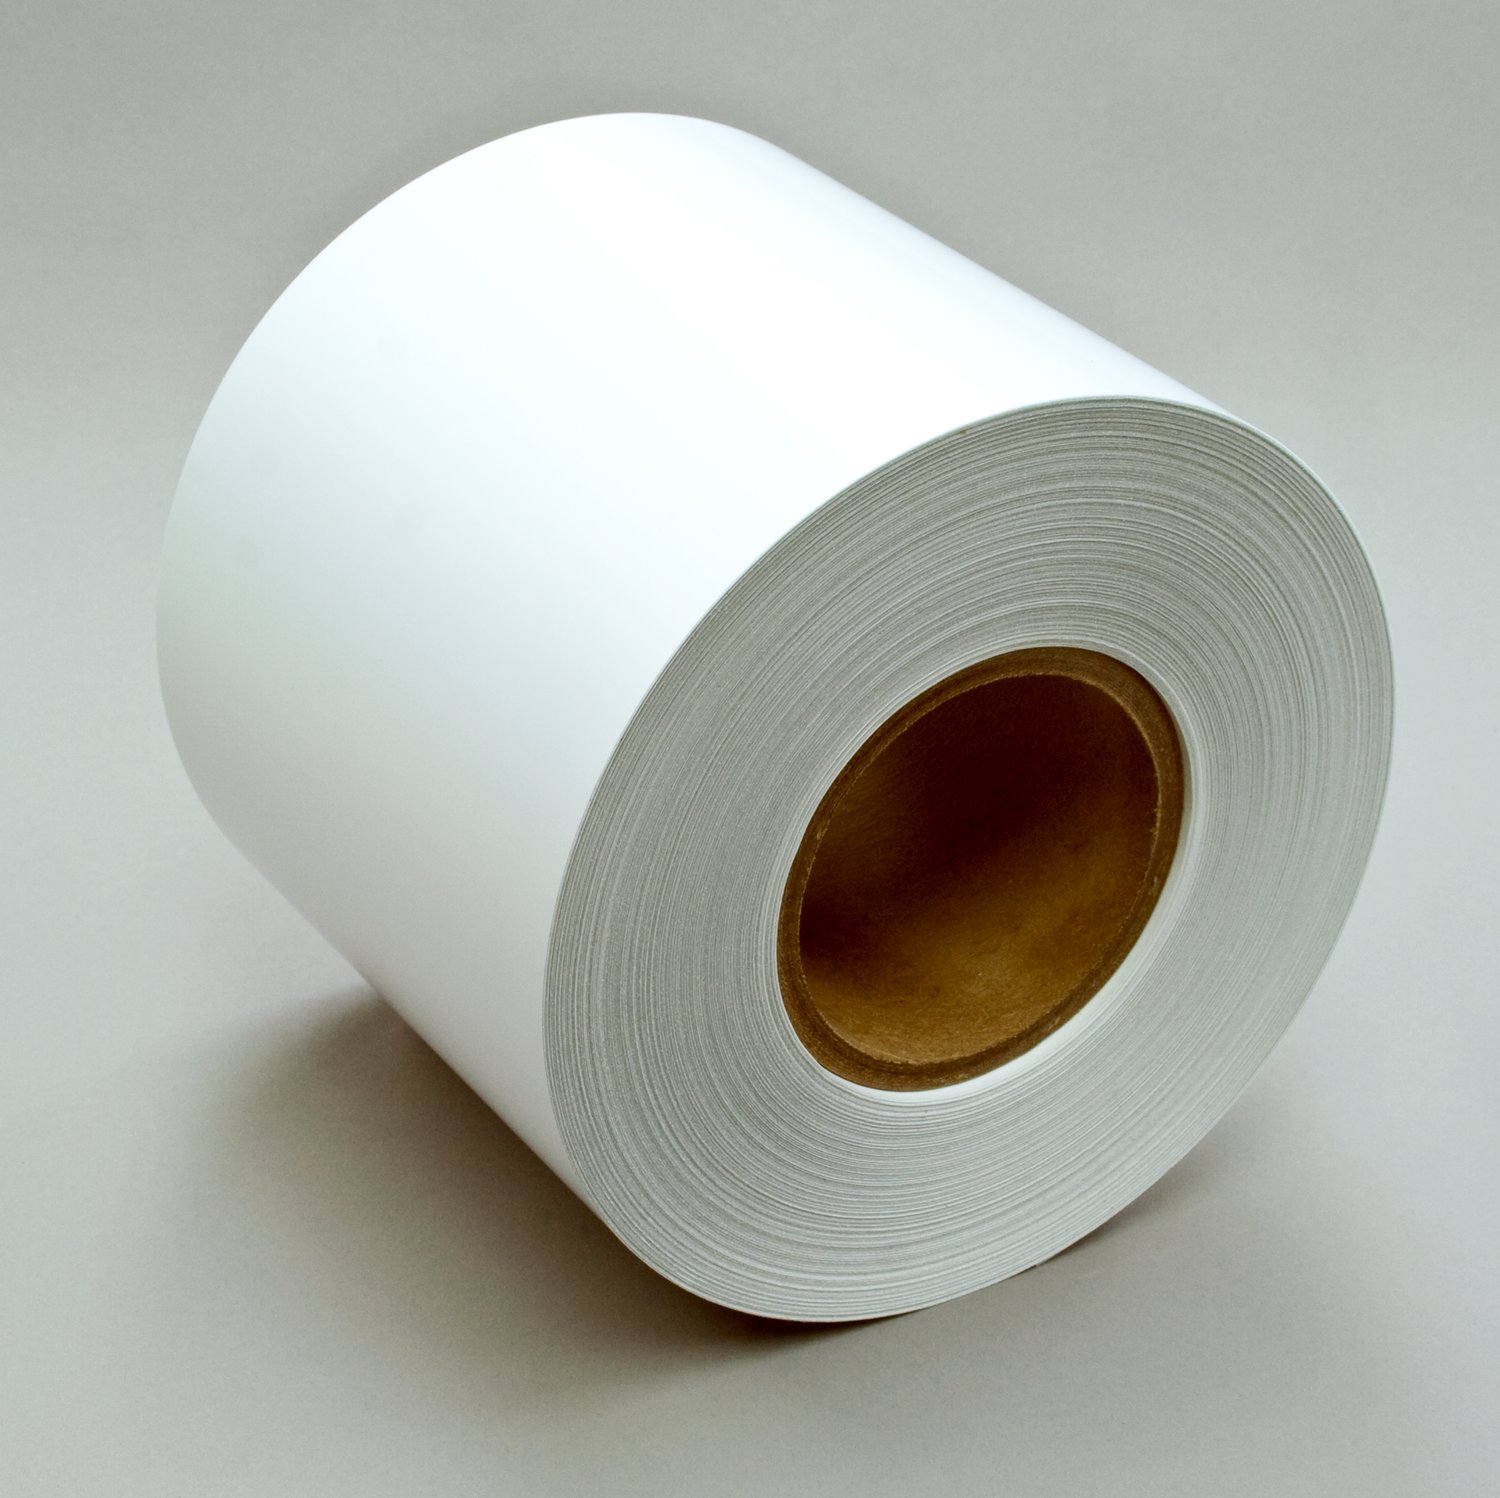 7000048569 - 3M Thermal Transfer Label Material 7813, Silver Polyester Matte, 6 in x
1668 ft, 1 Roll/Case